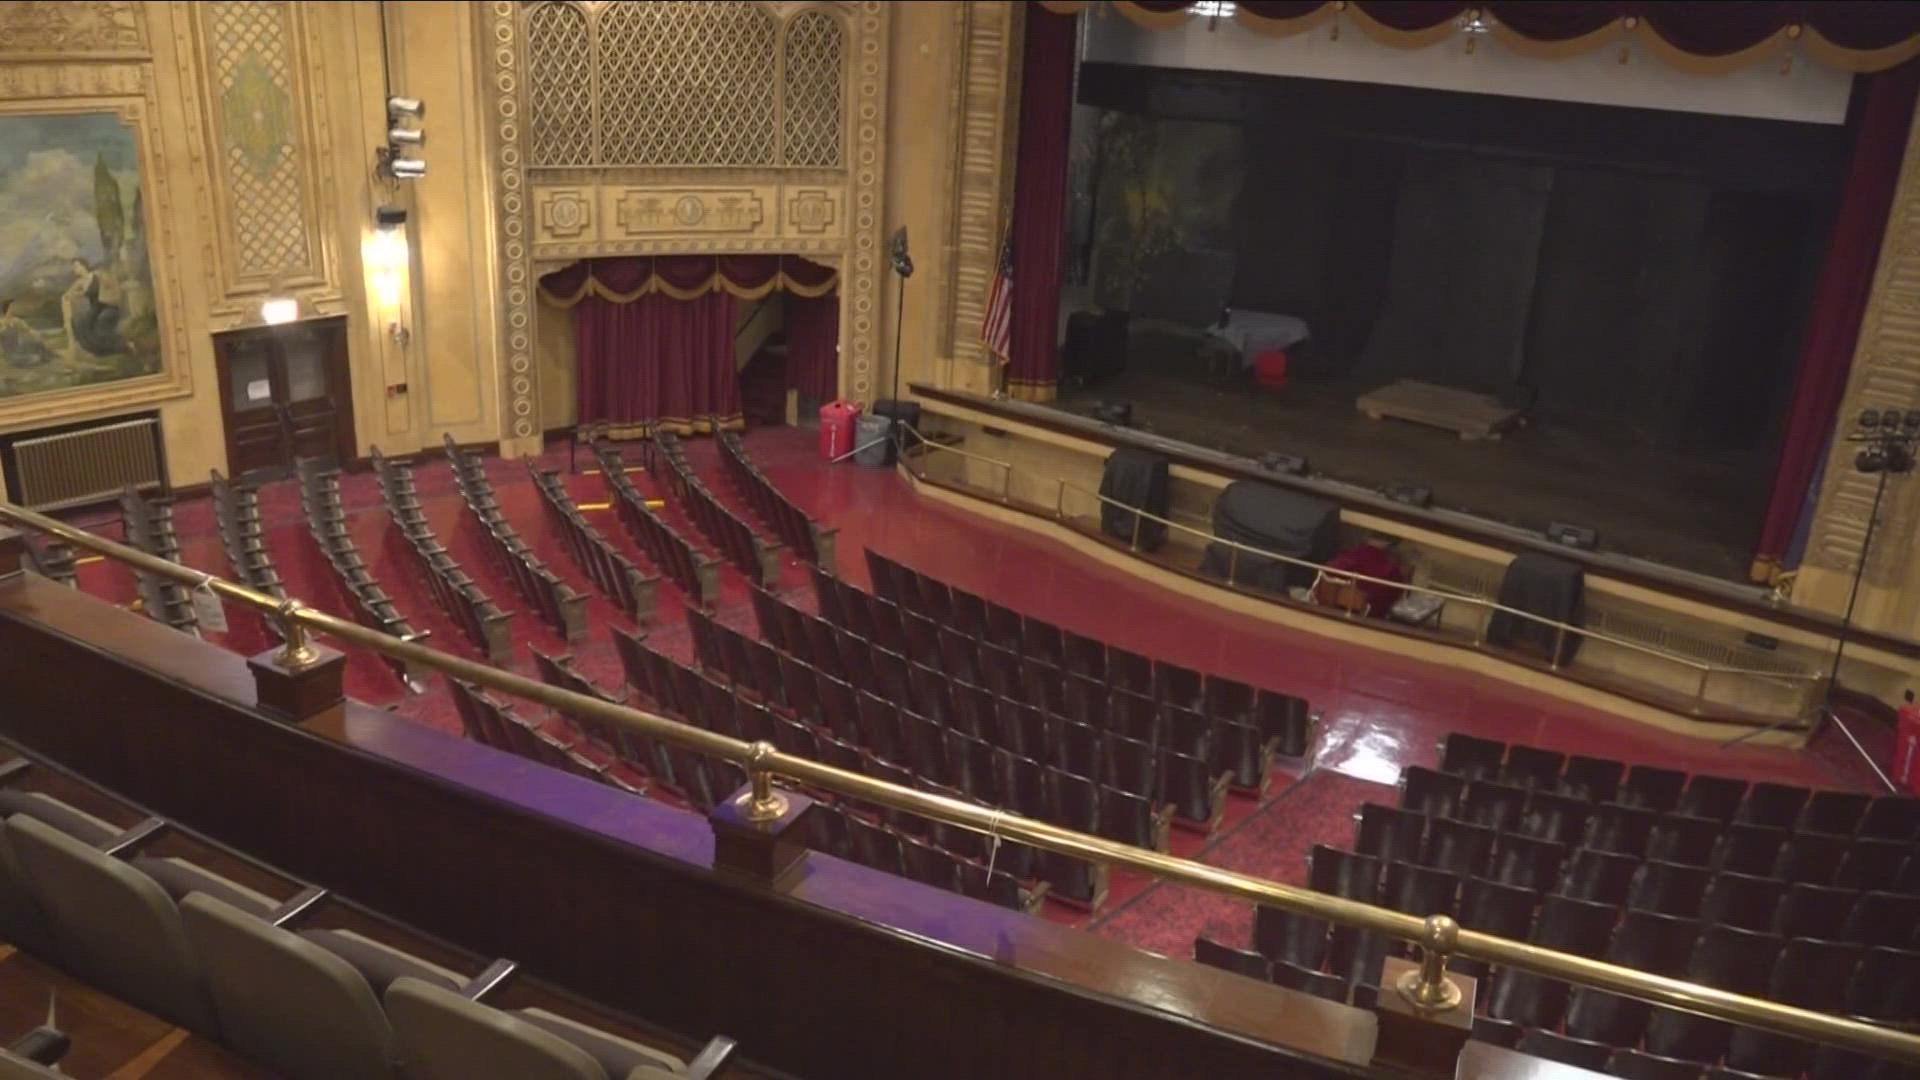 Gowanda Hollywood Theater tour with Kevin O'Neill